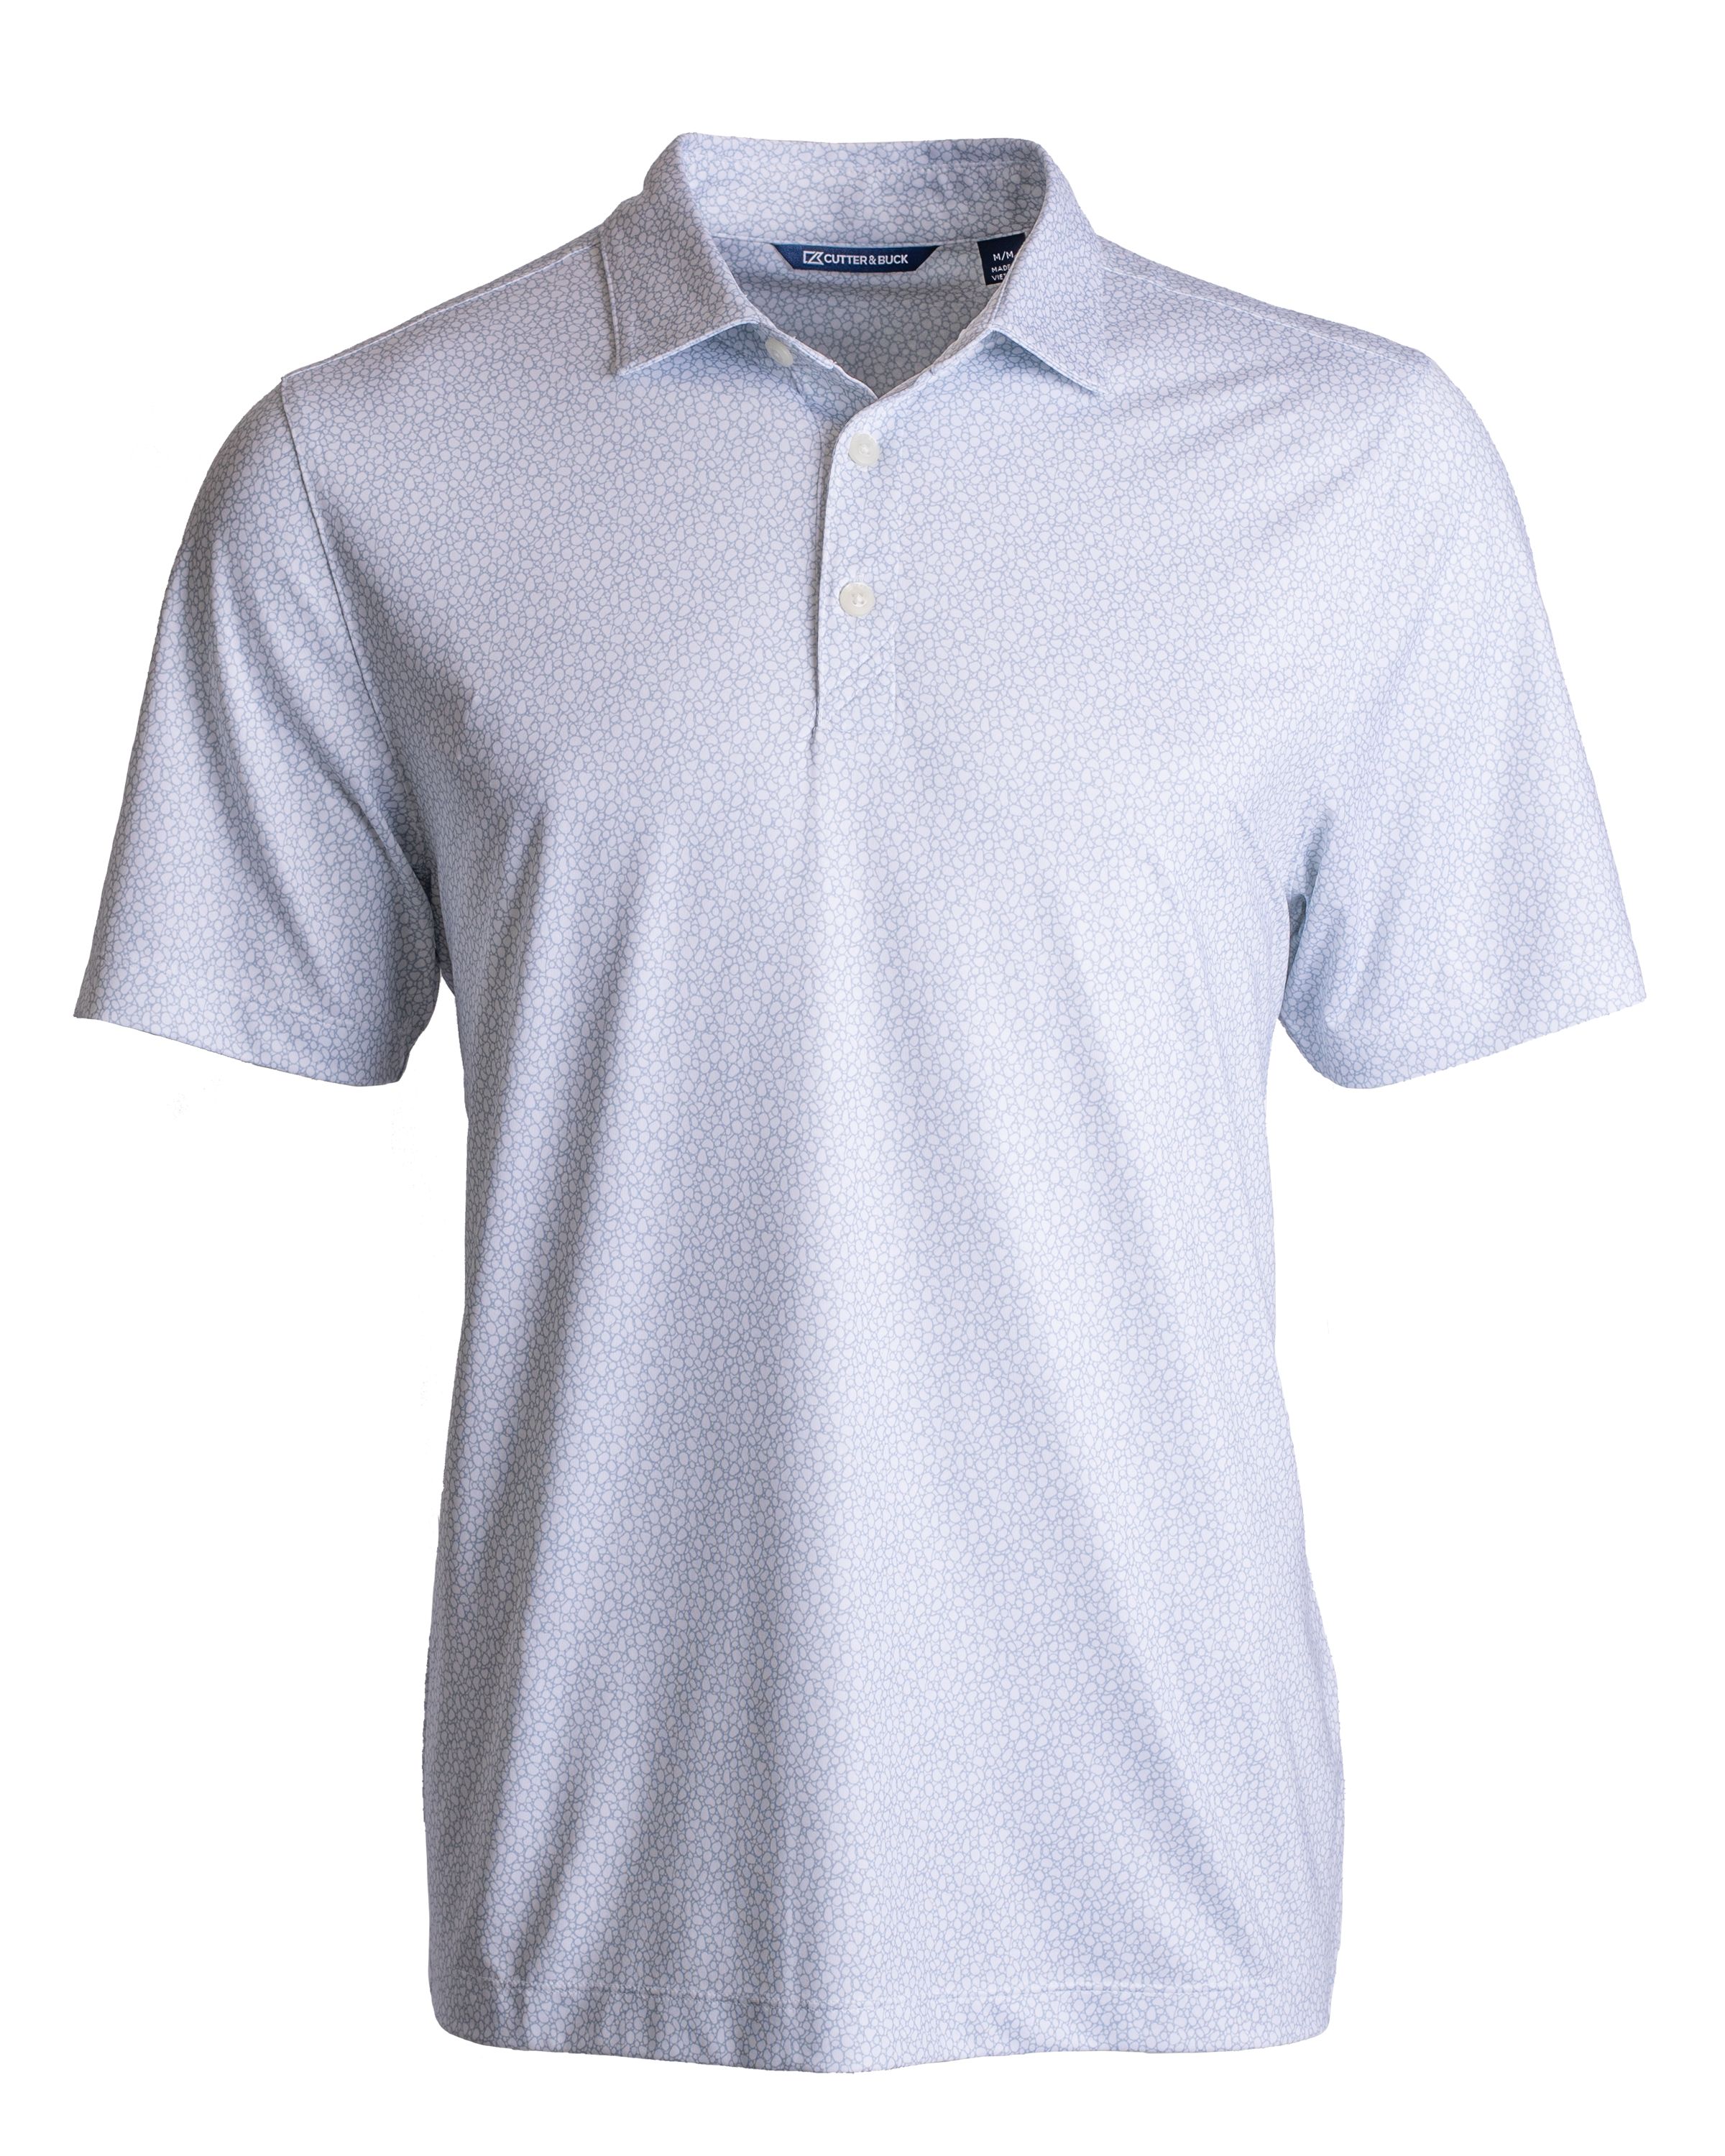 CUTTER & BUCK MCK01304 - Men's Pike Eco Pebble Print Stretch Recycled Polo